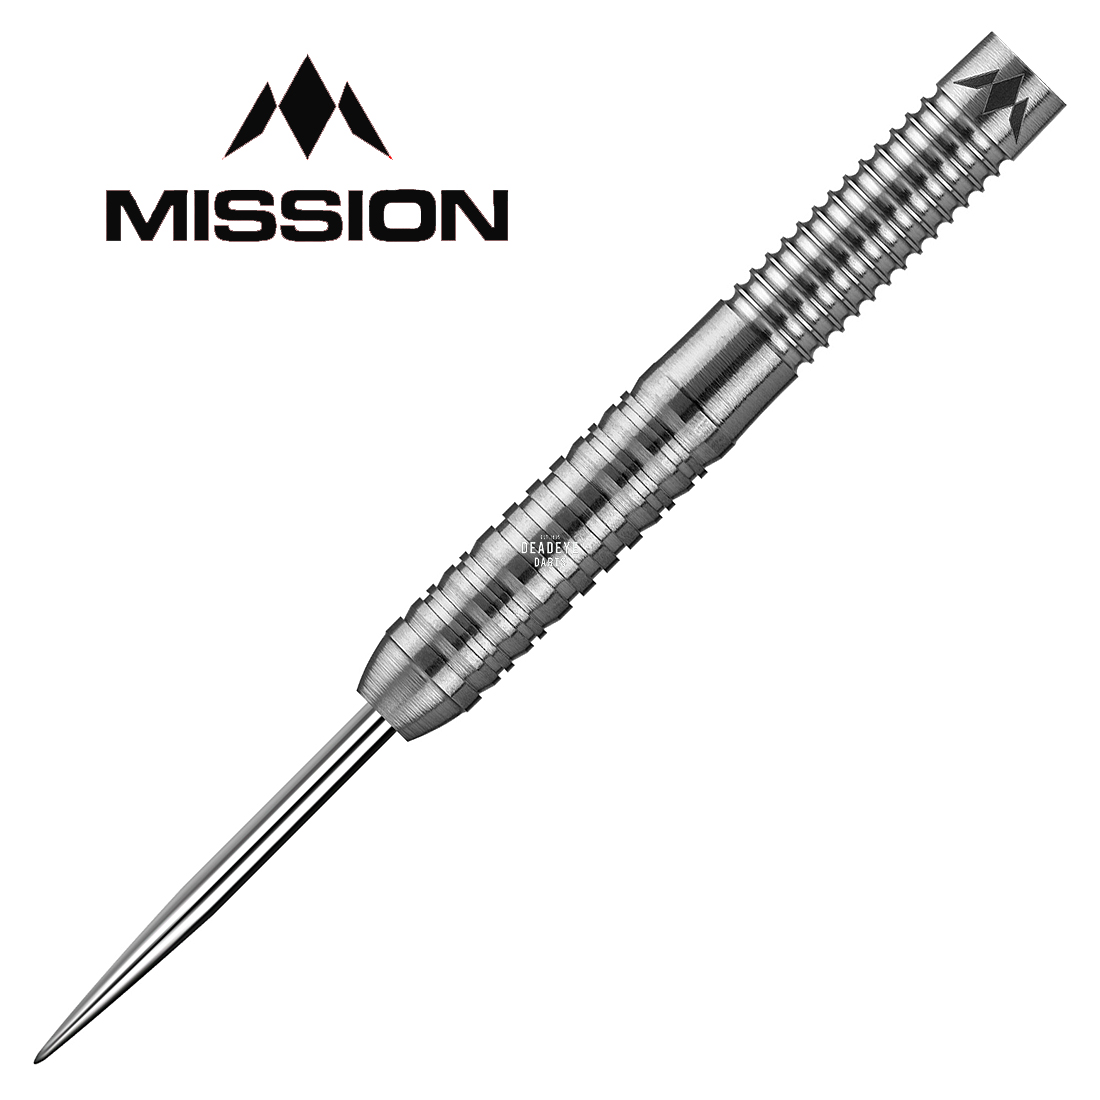 Review of Mission Octane M3 26g Darts